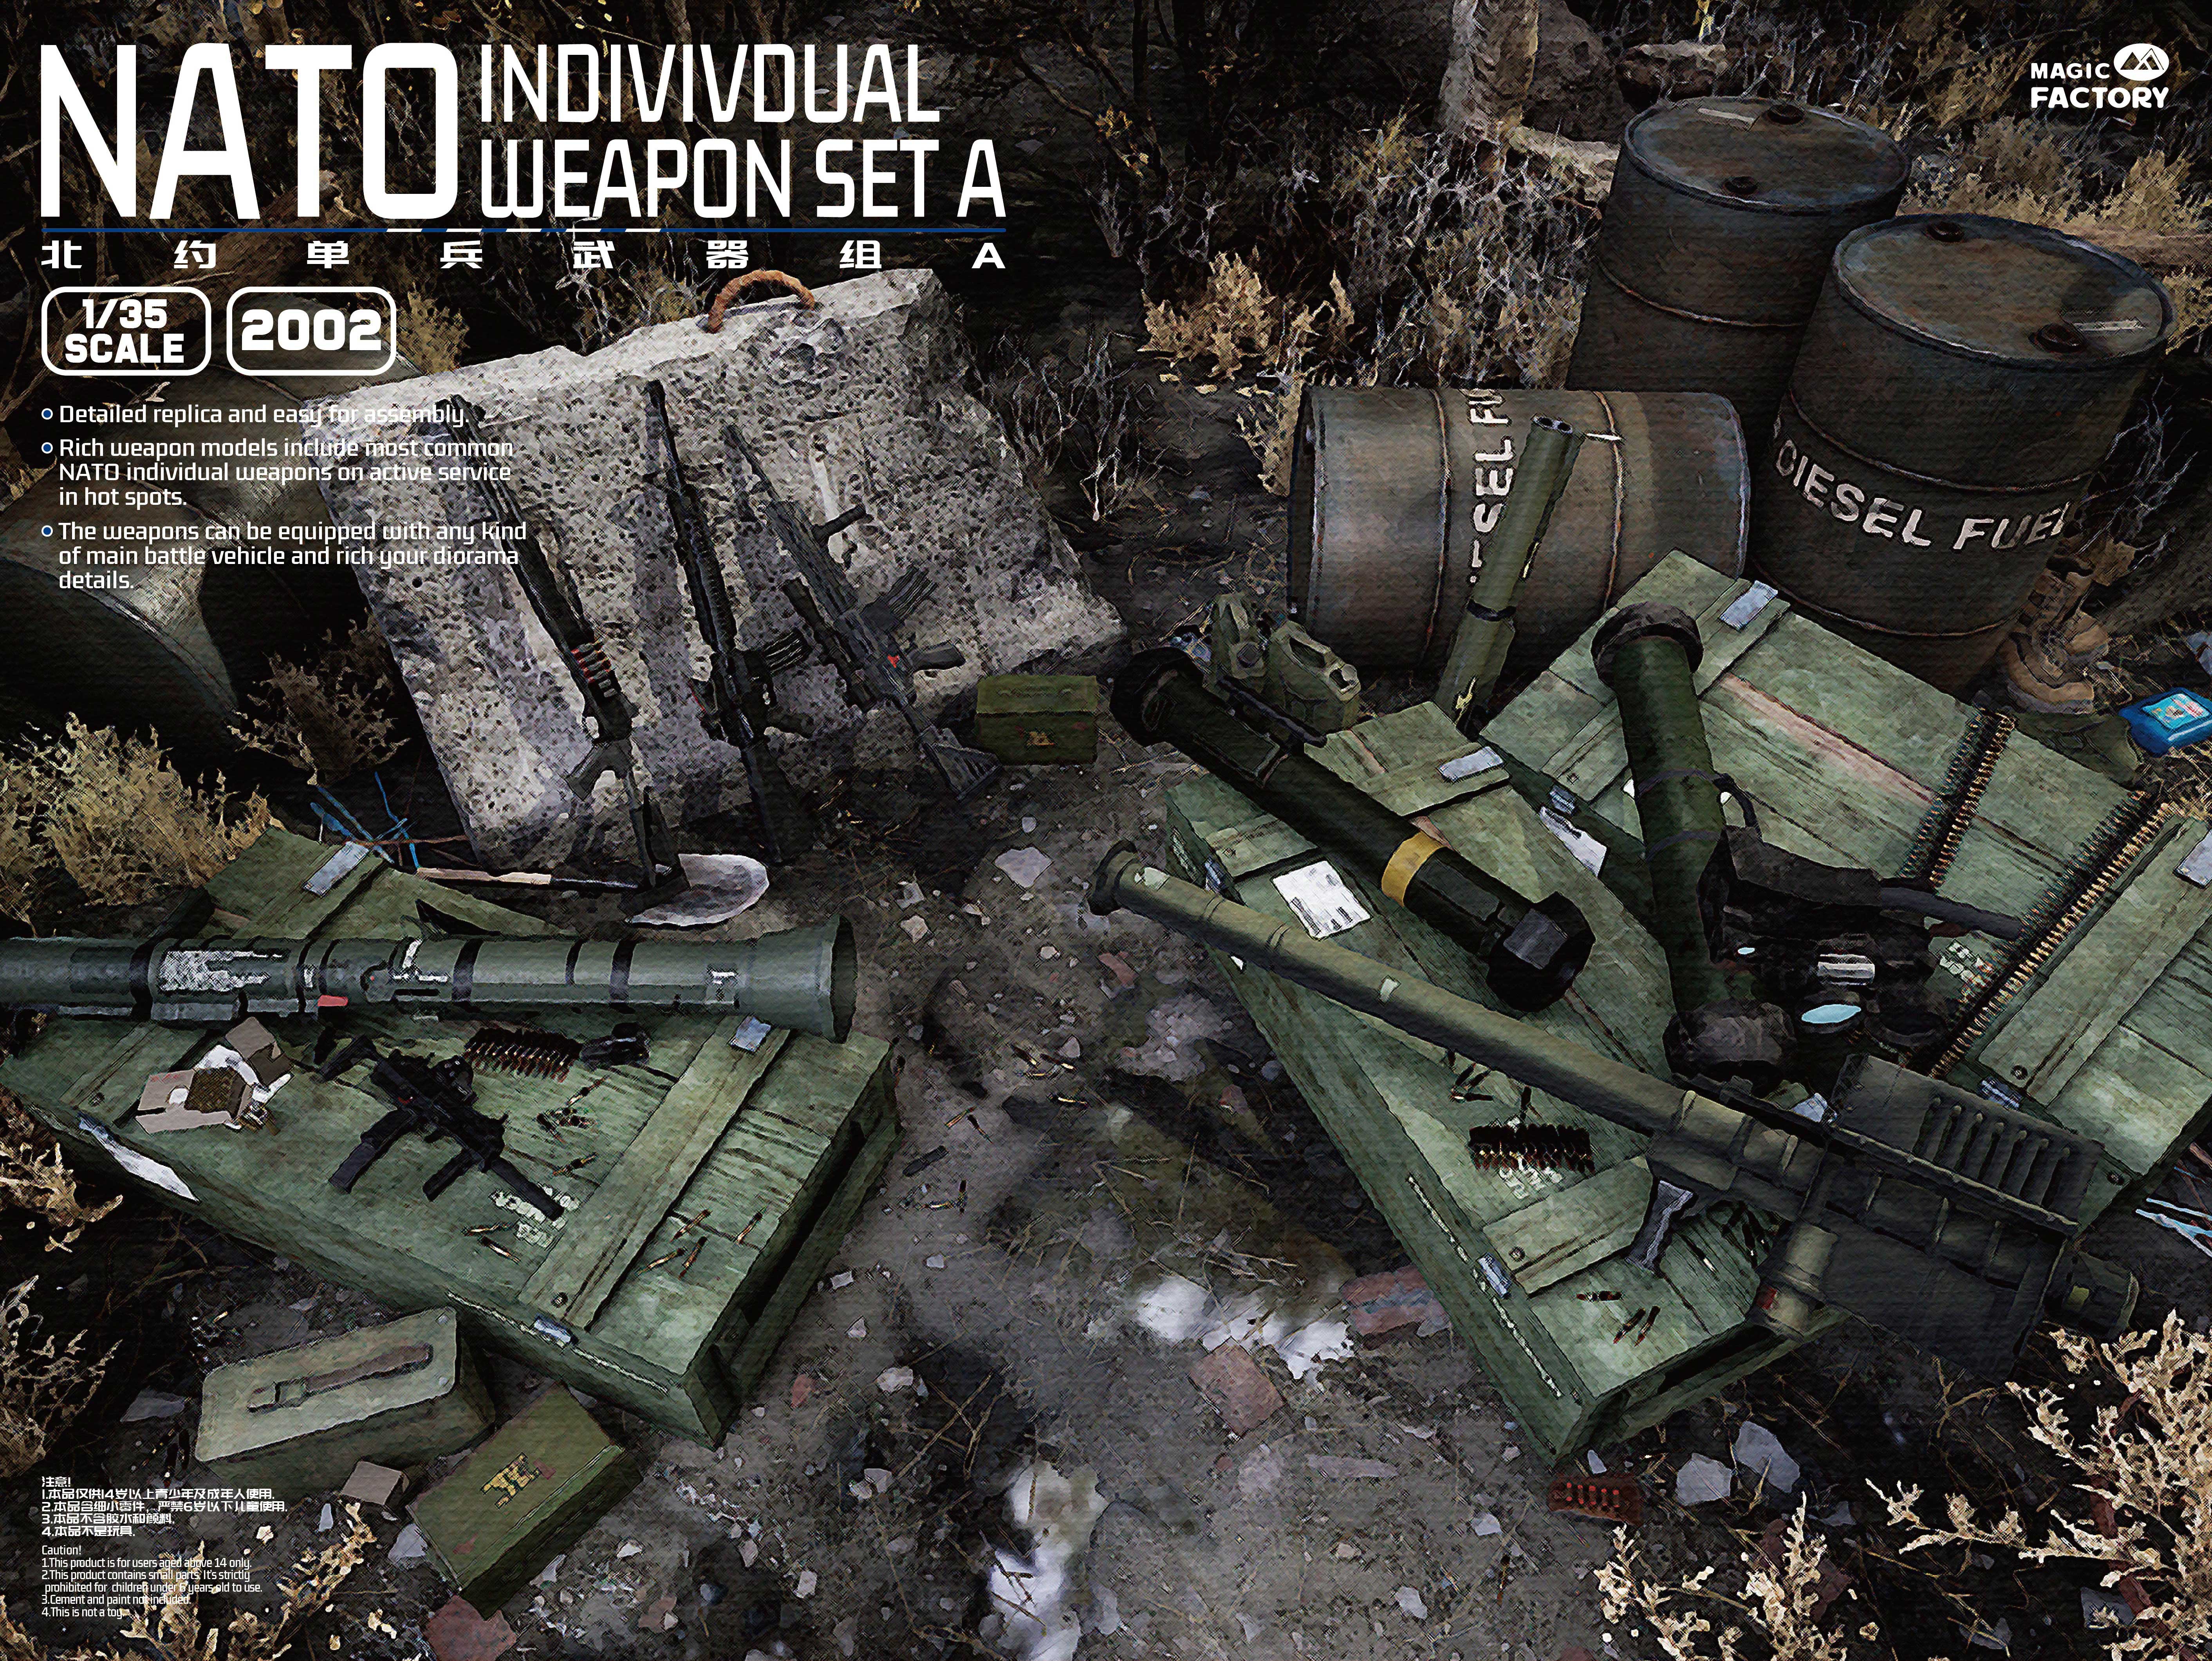 NATO Individual Weapon Set A 1/35 #2002 by Magic Factory